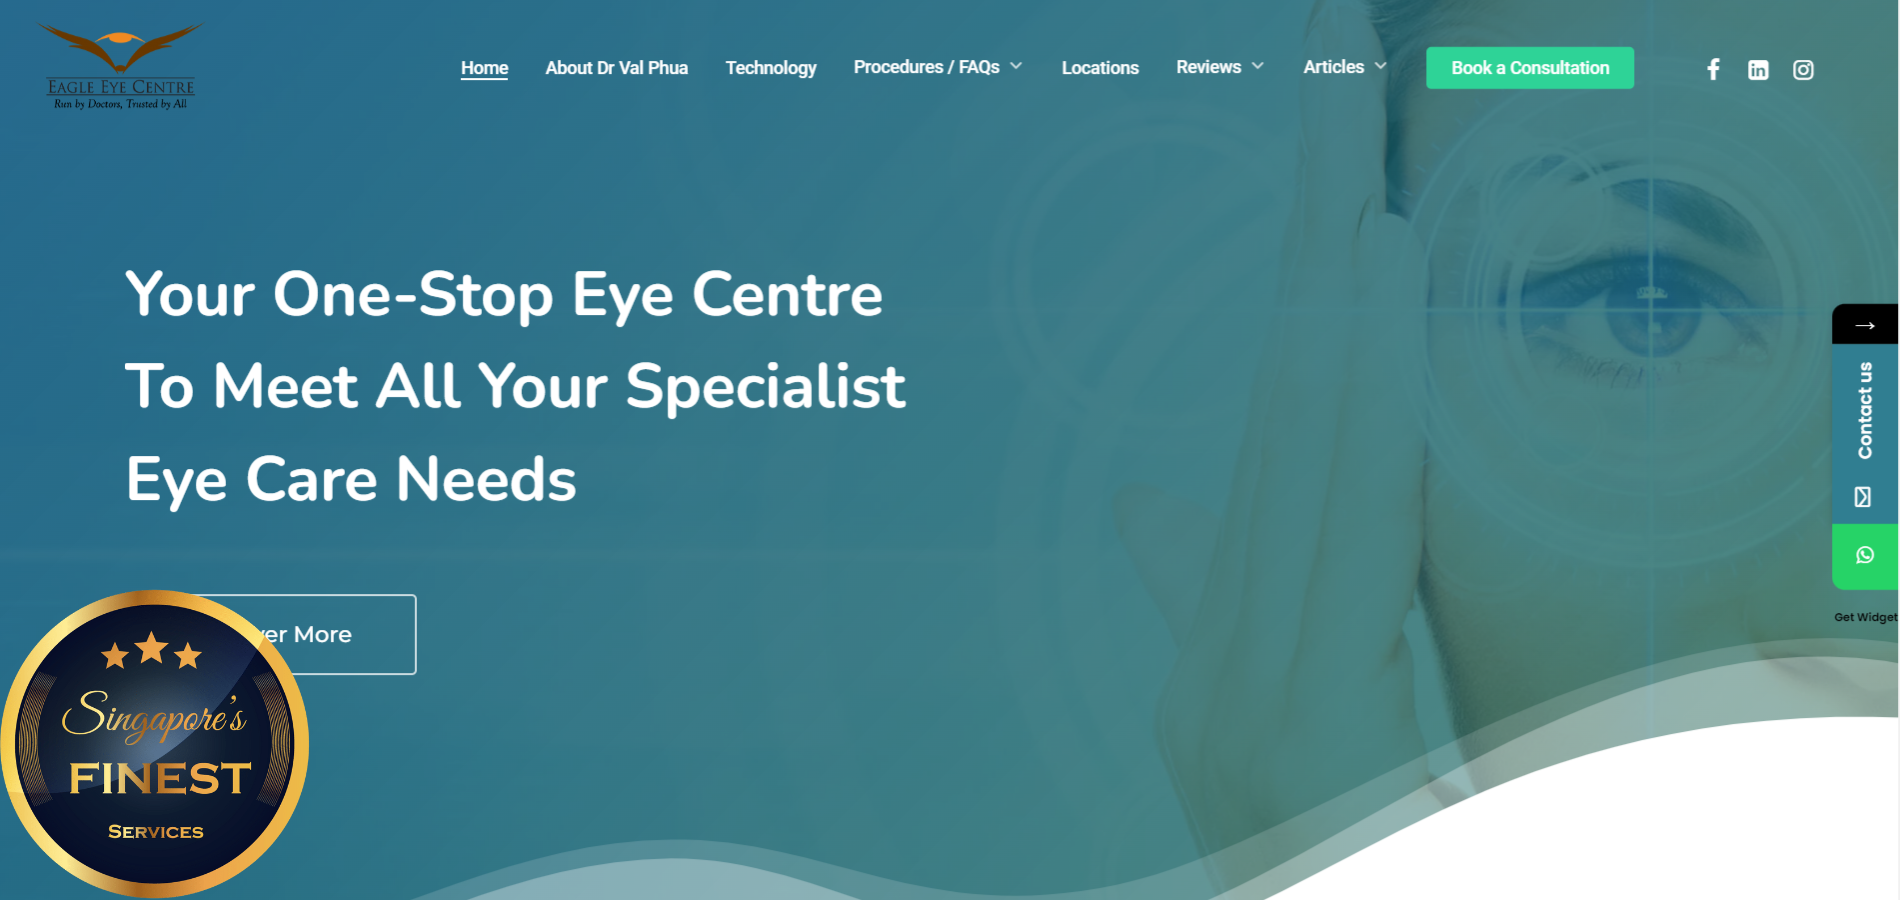 The Finest Clinics For Cataract Surgery in Singapore